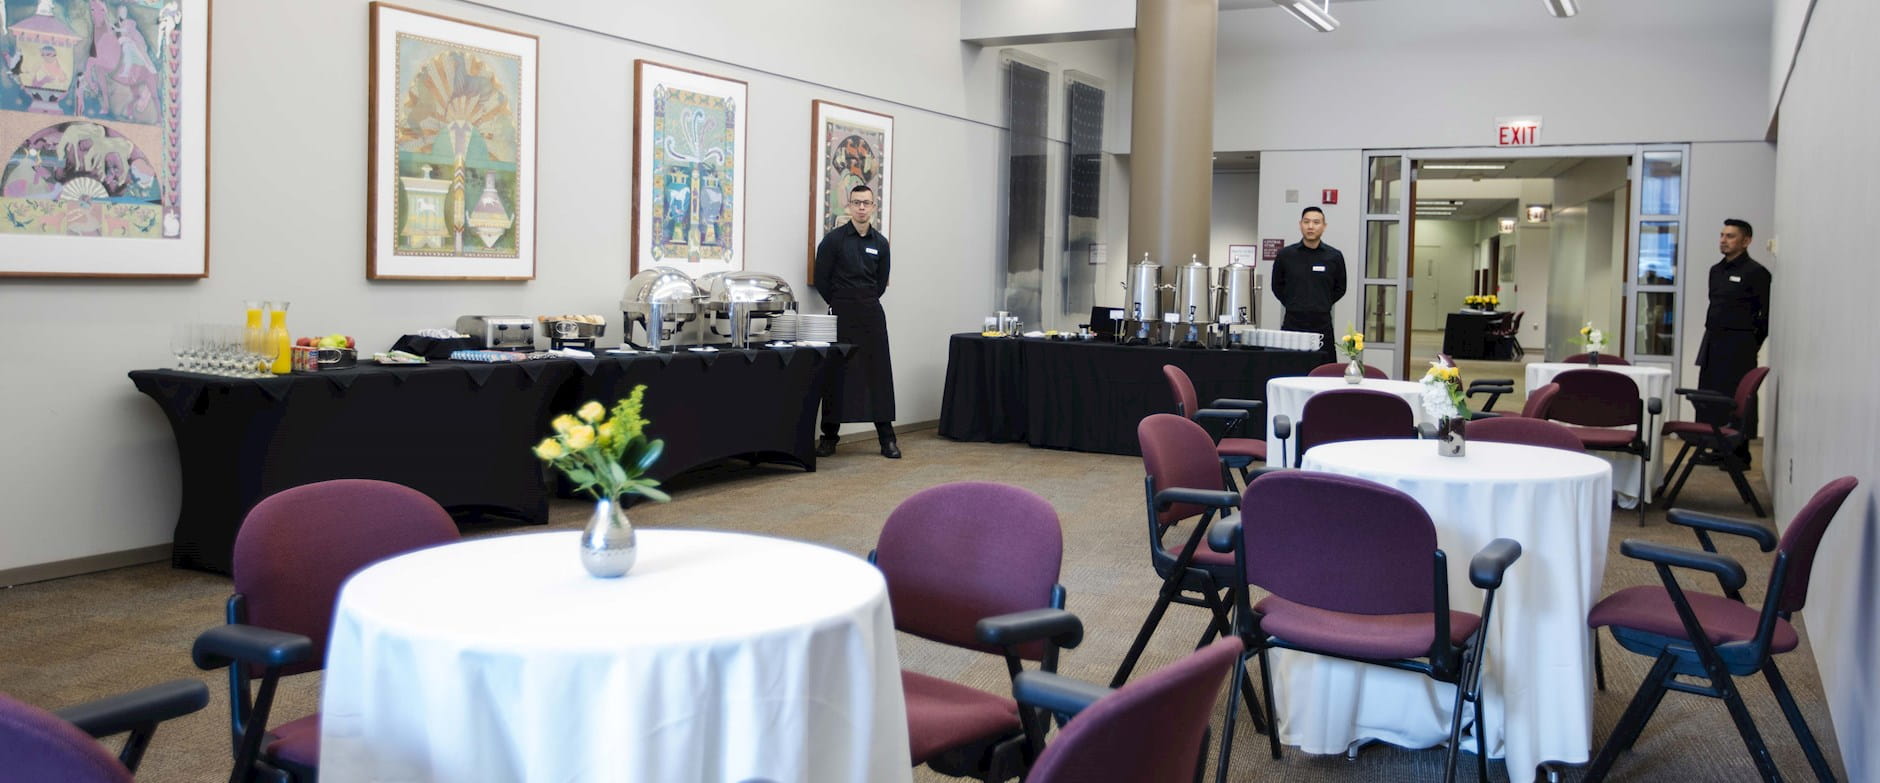 The lobby area of room 100 at the Gleacher Center with a snack buffet and coffee station set up at the back; 3 service staff pose in the back with round tables and chairs in the front